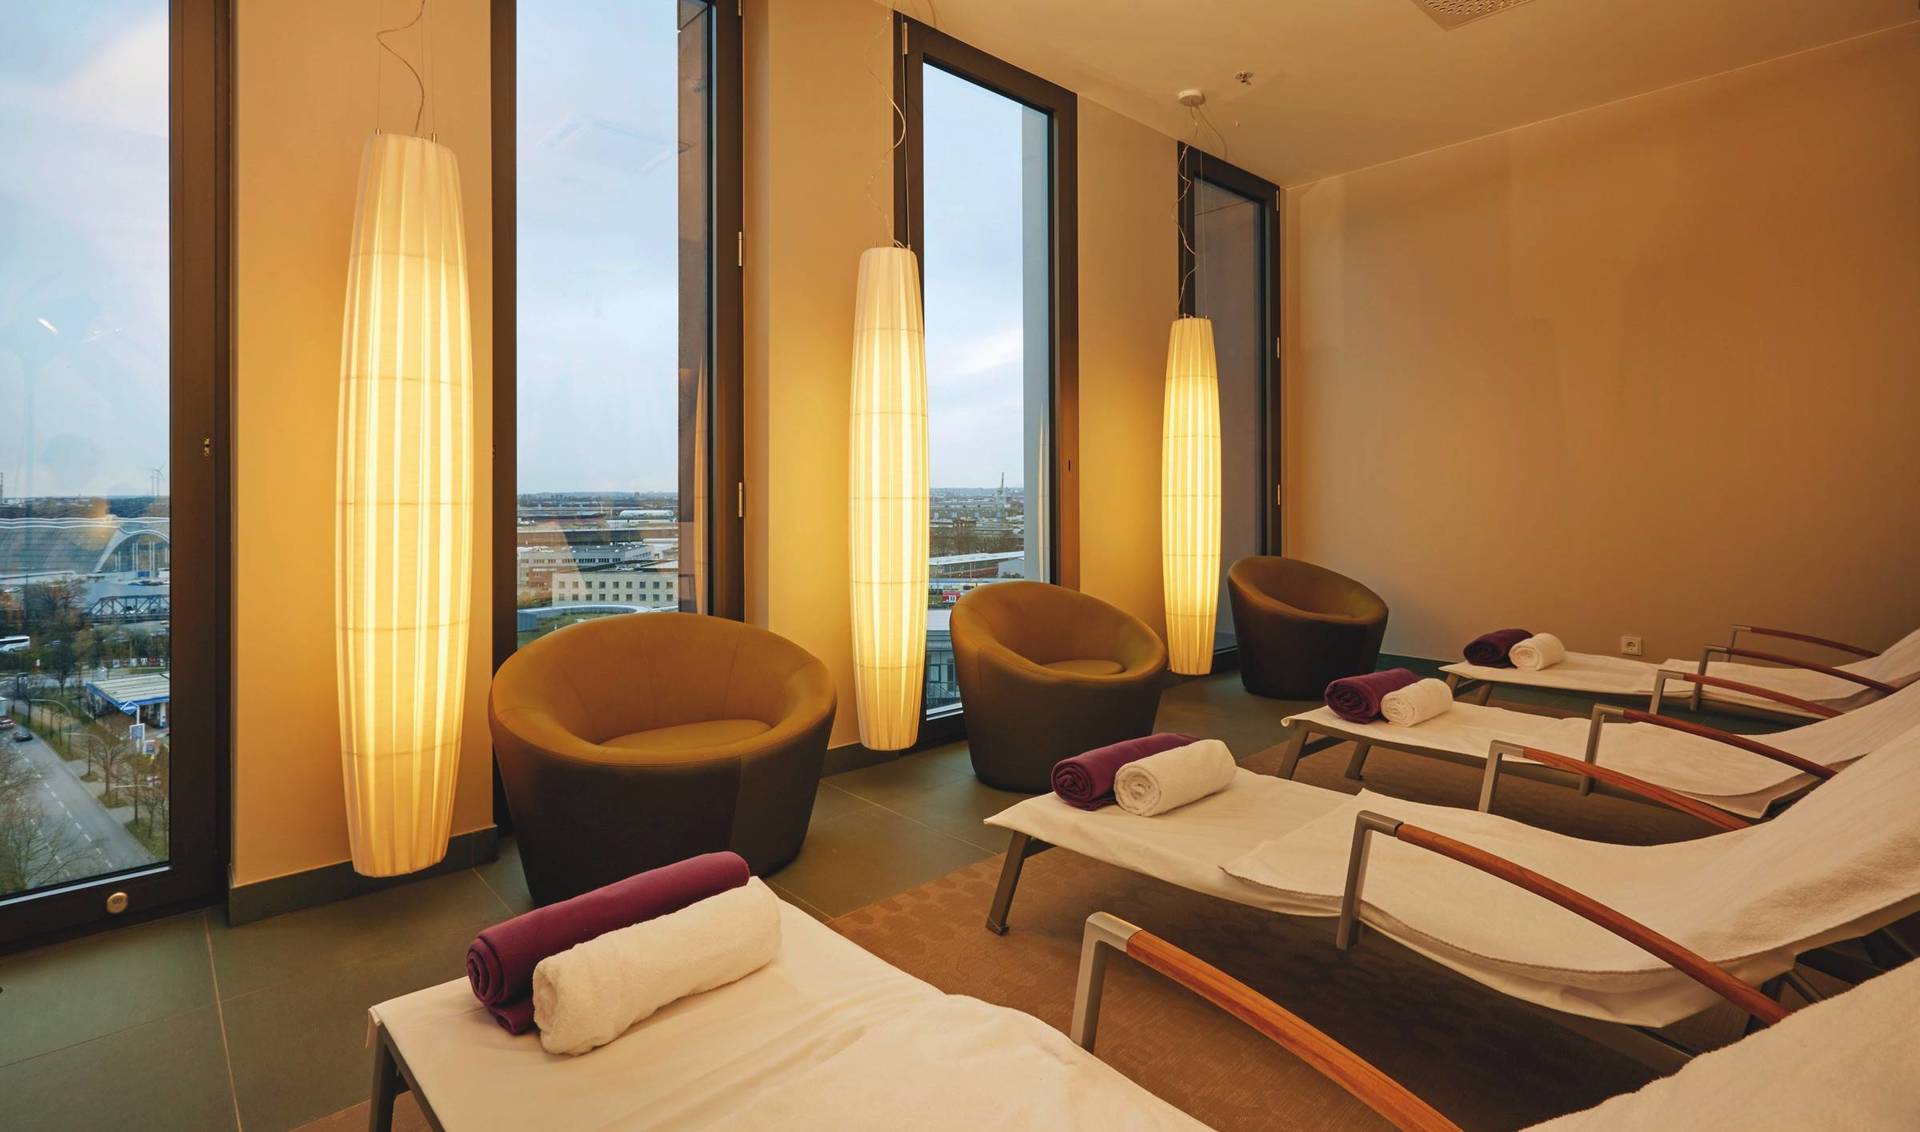 Relaxation in the spa area of the Hyperion Hotel Hamburg - Official website